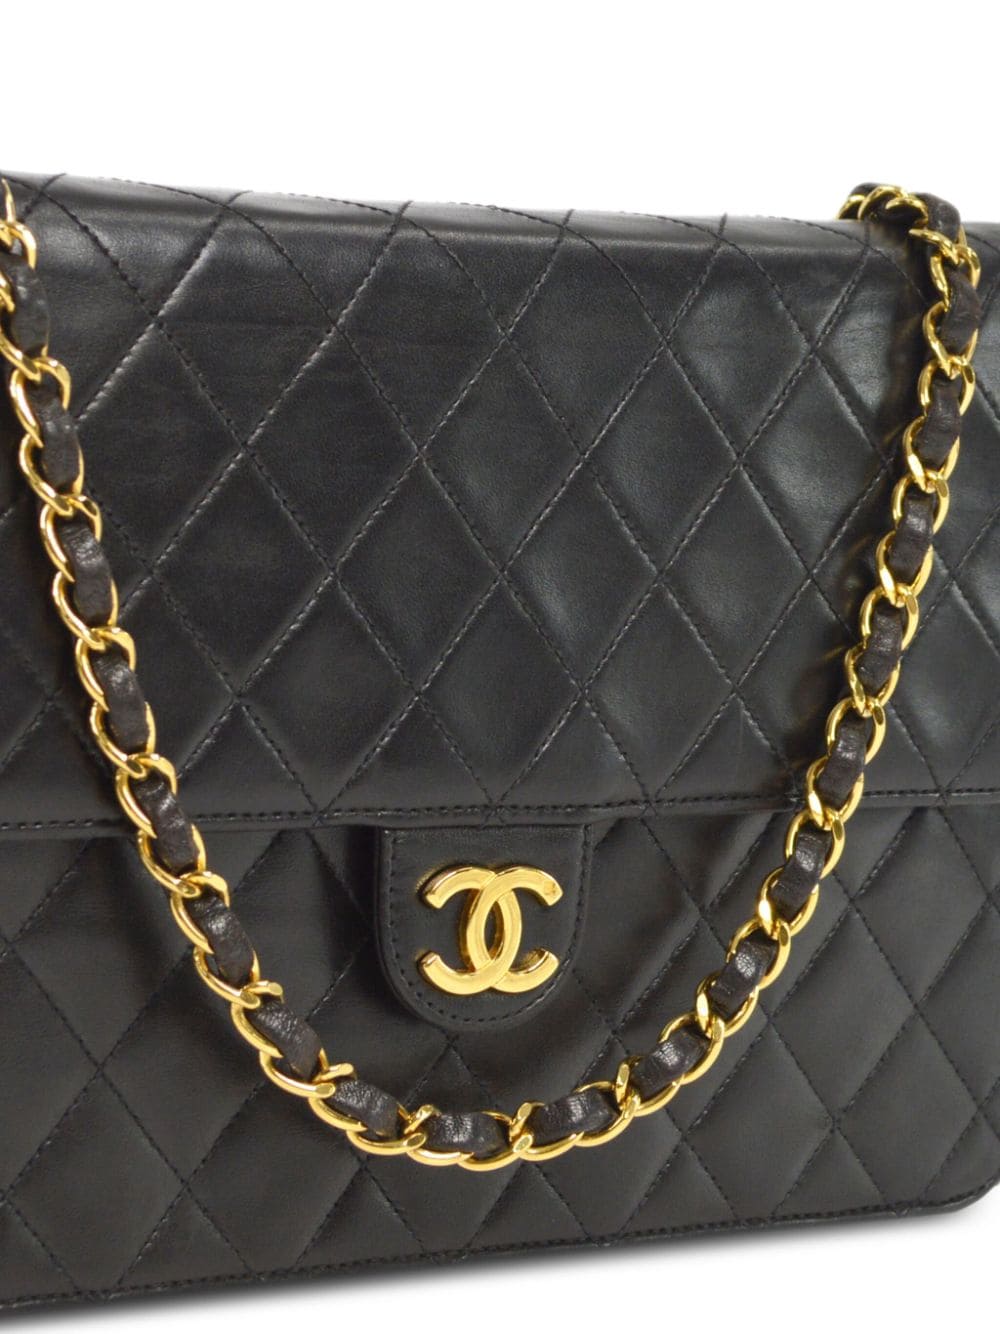 CHANEL Pre-Owned 1998 Classic Flap Shoulder Bag - Farfetch